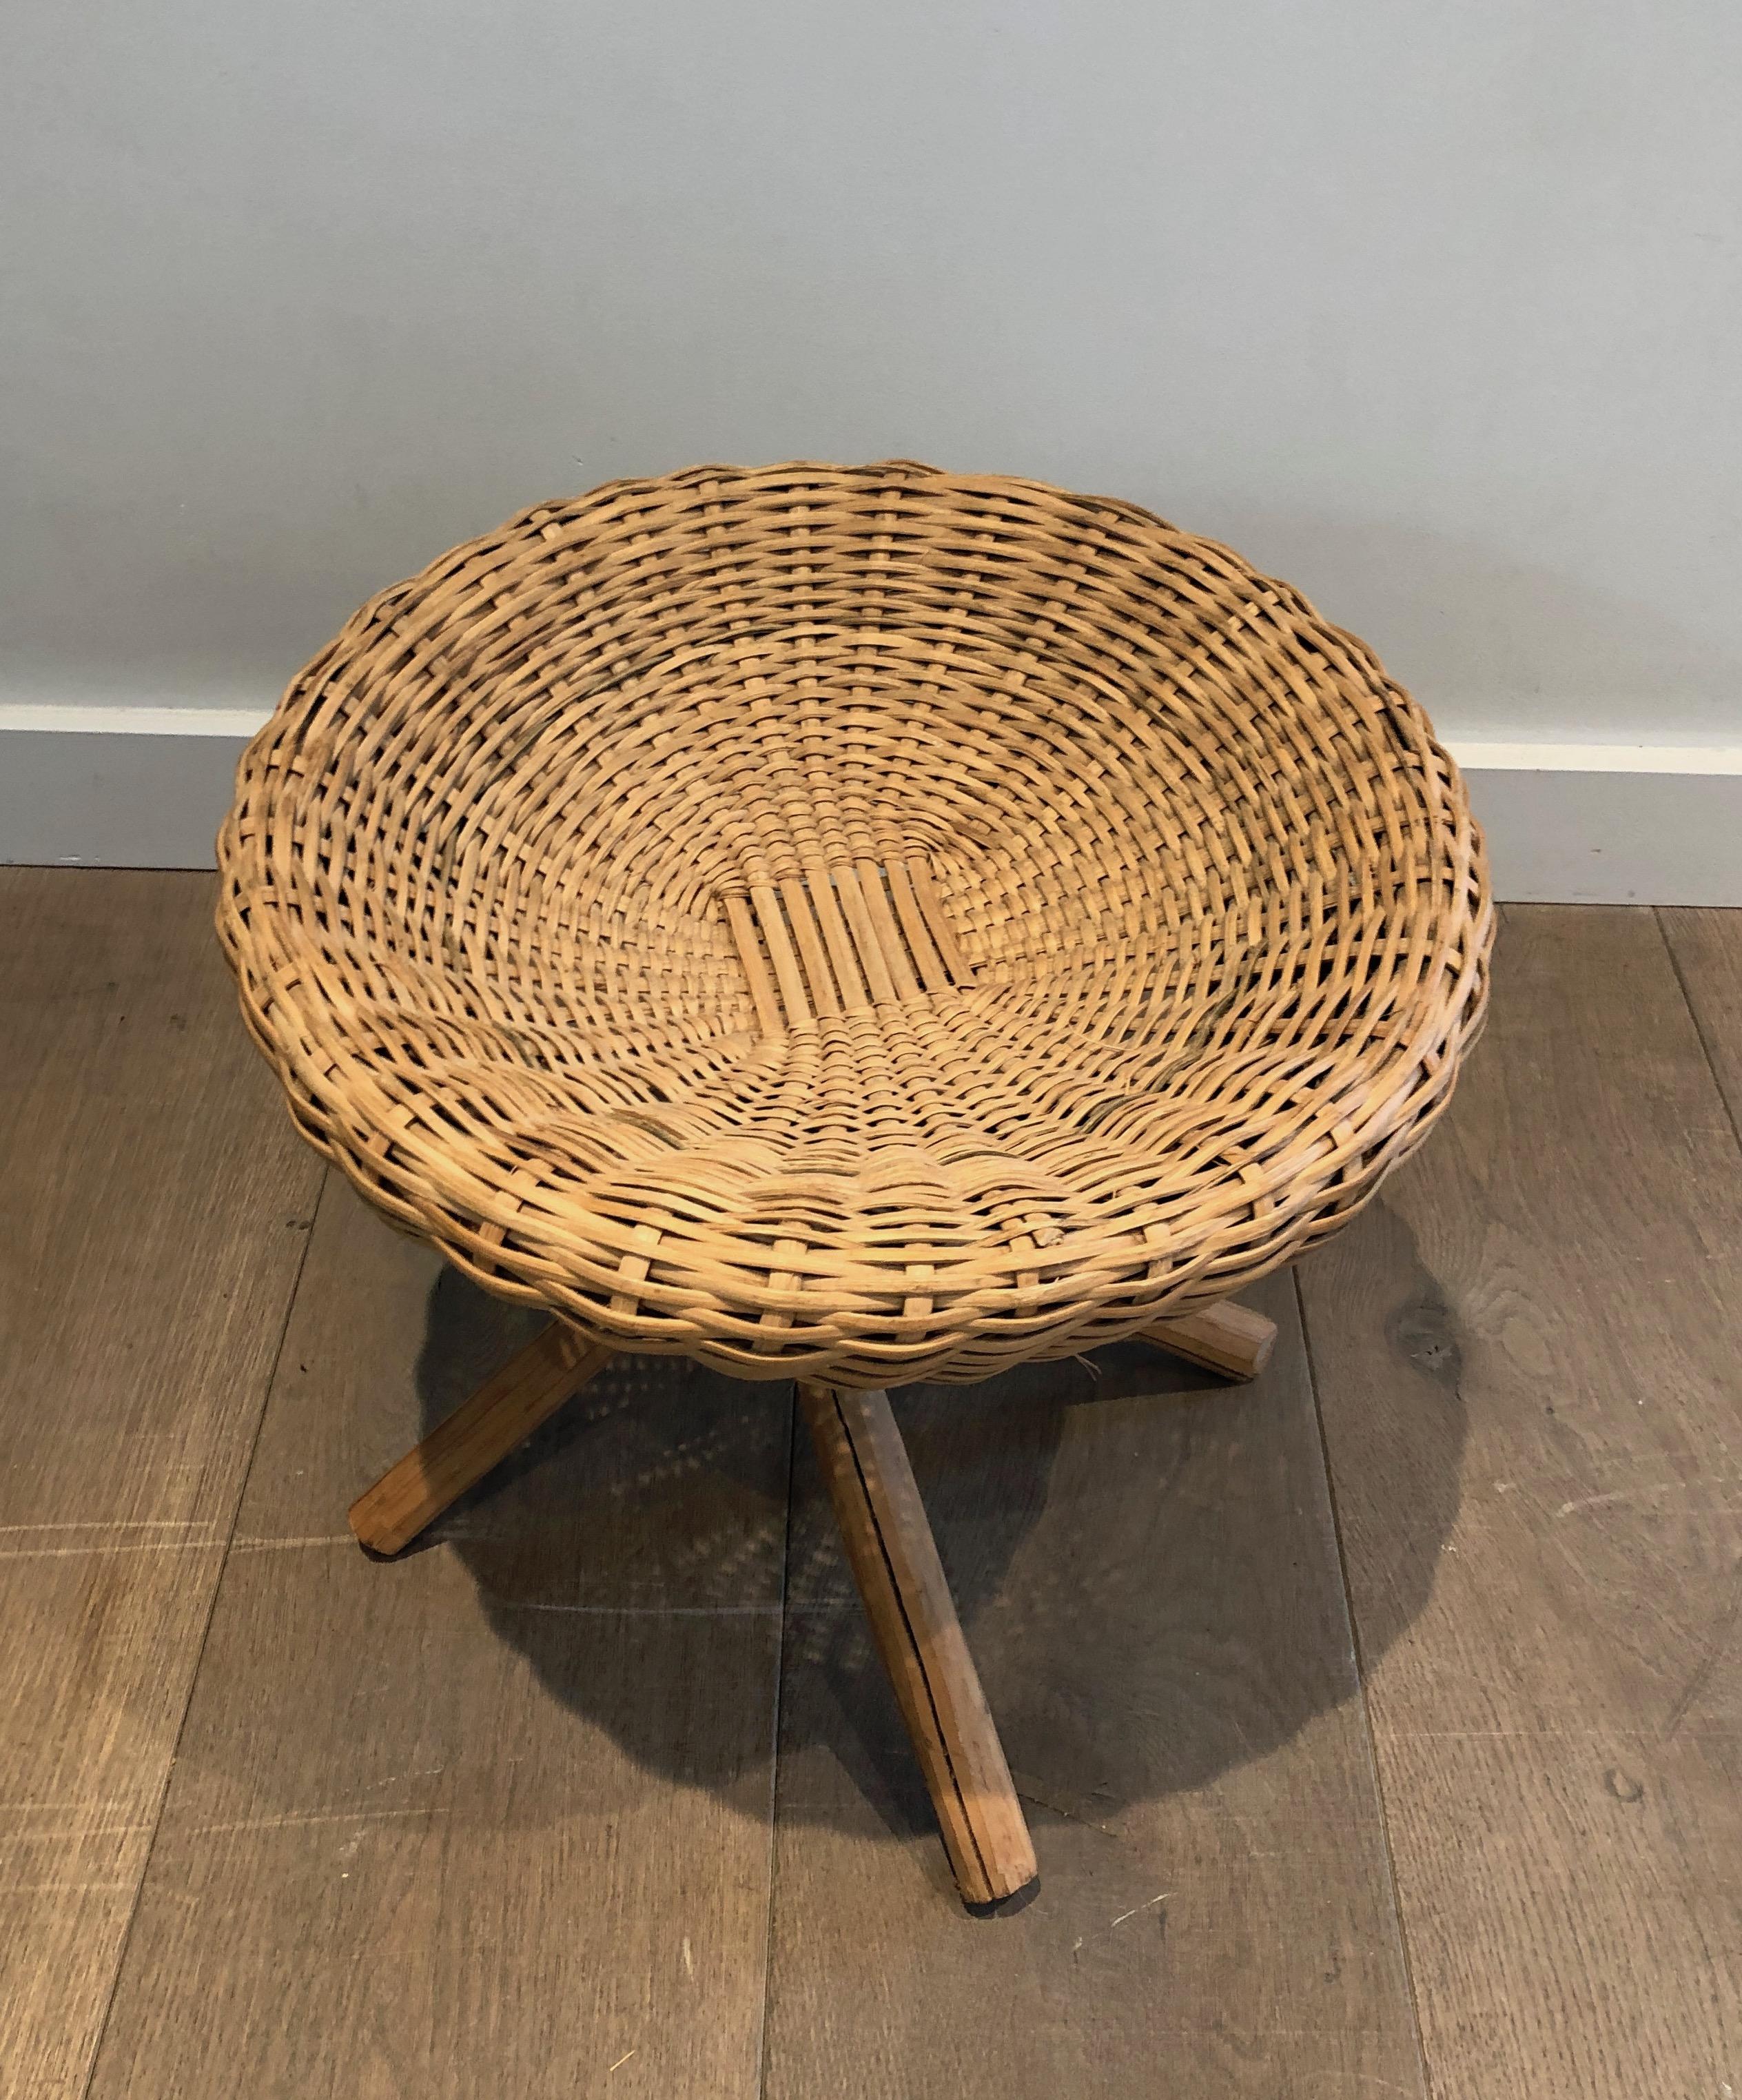 Pair of Wood and Rattan Stools, French, Circa 1970 For Sale 2